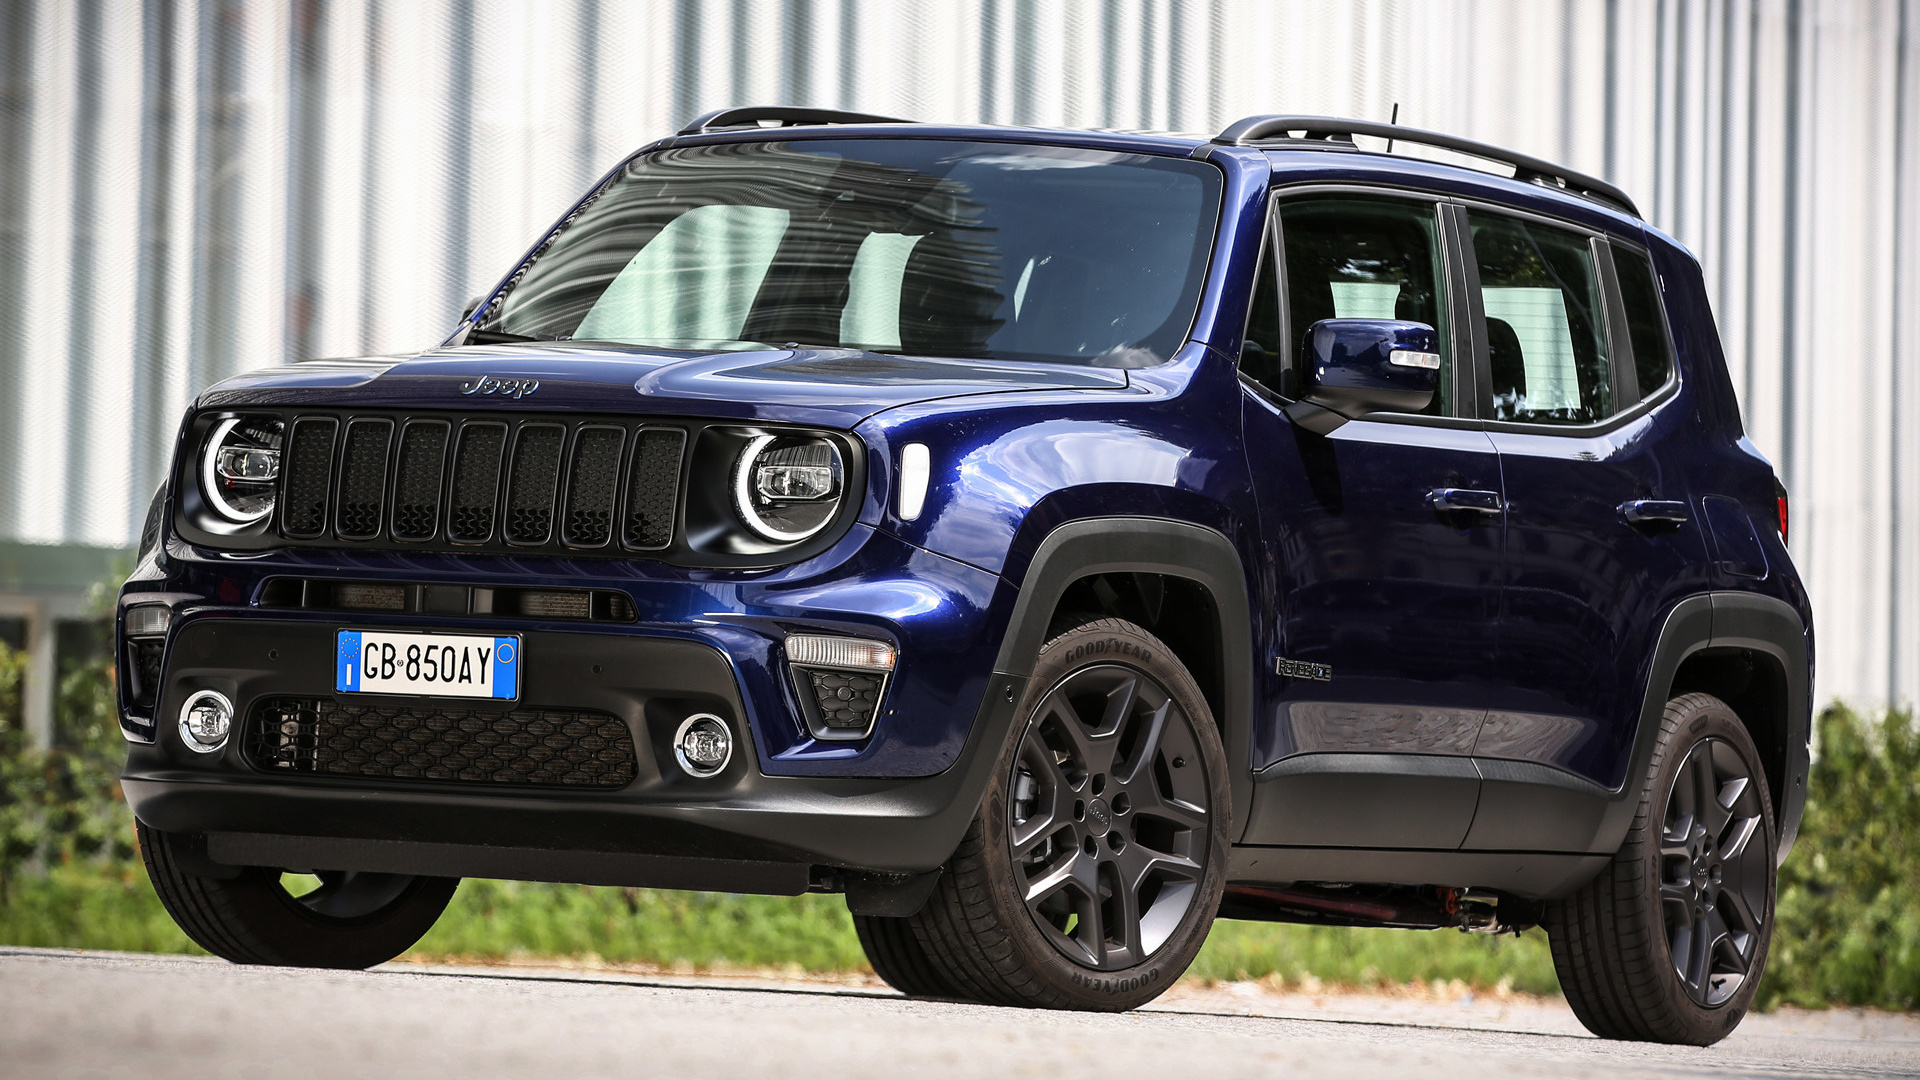 2020 Jeep Renegade Plug-in Hybrid, Elevated electrification, Eco-friendly driving, Advanced technology, 1920x1080 Full HD Desktop